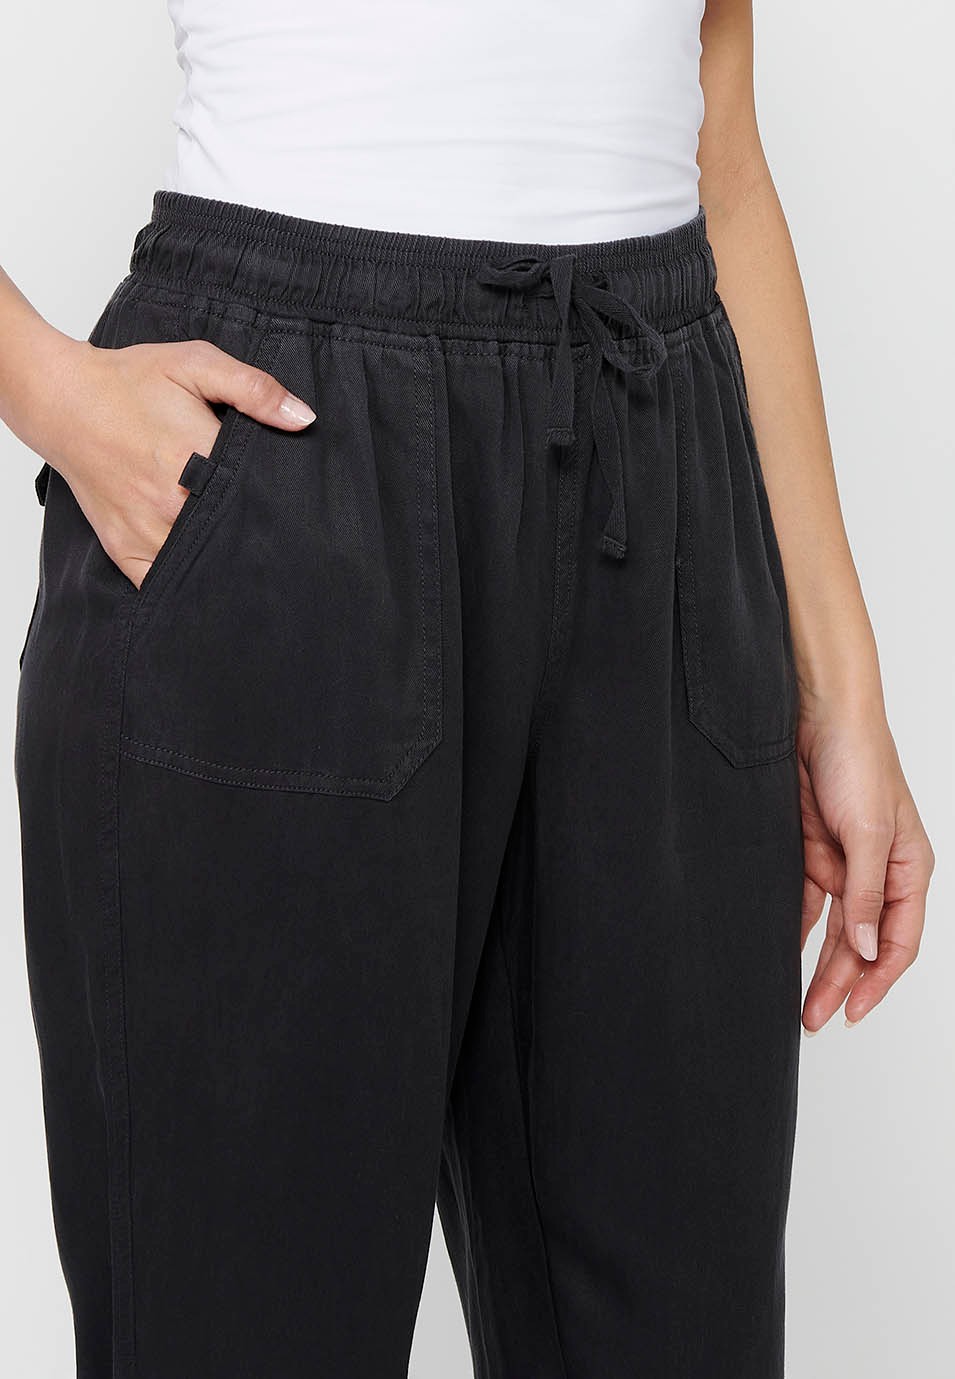 Long jogger pants with curled finish and rubberized waist with four pockets, two at the back with flap in Black for Women 7